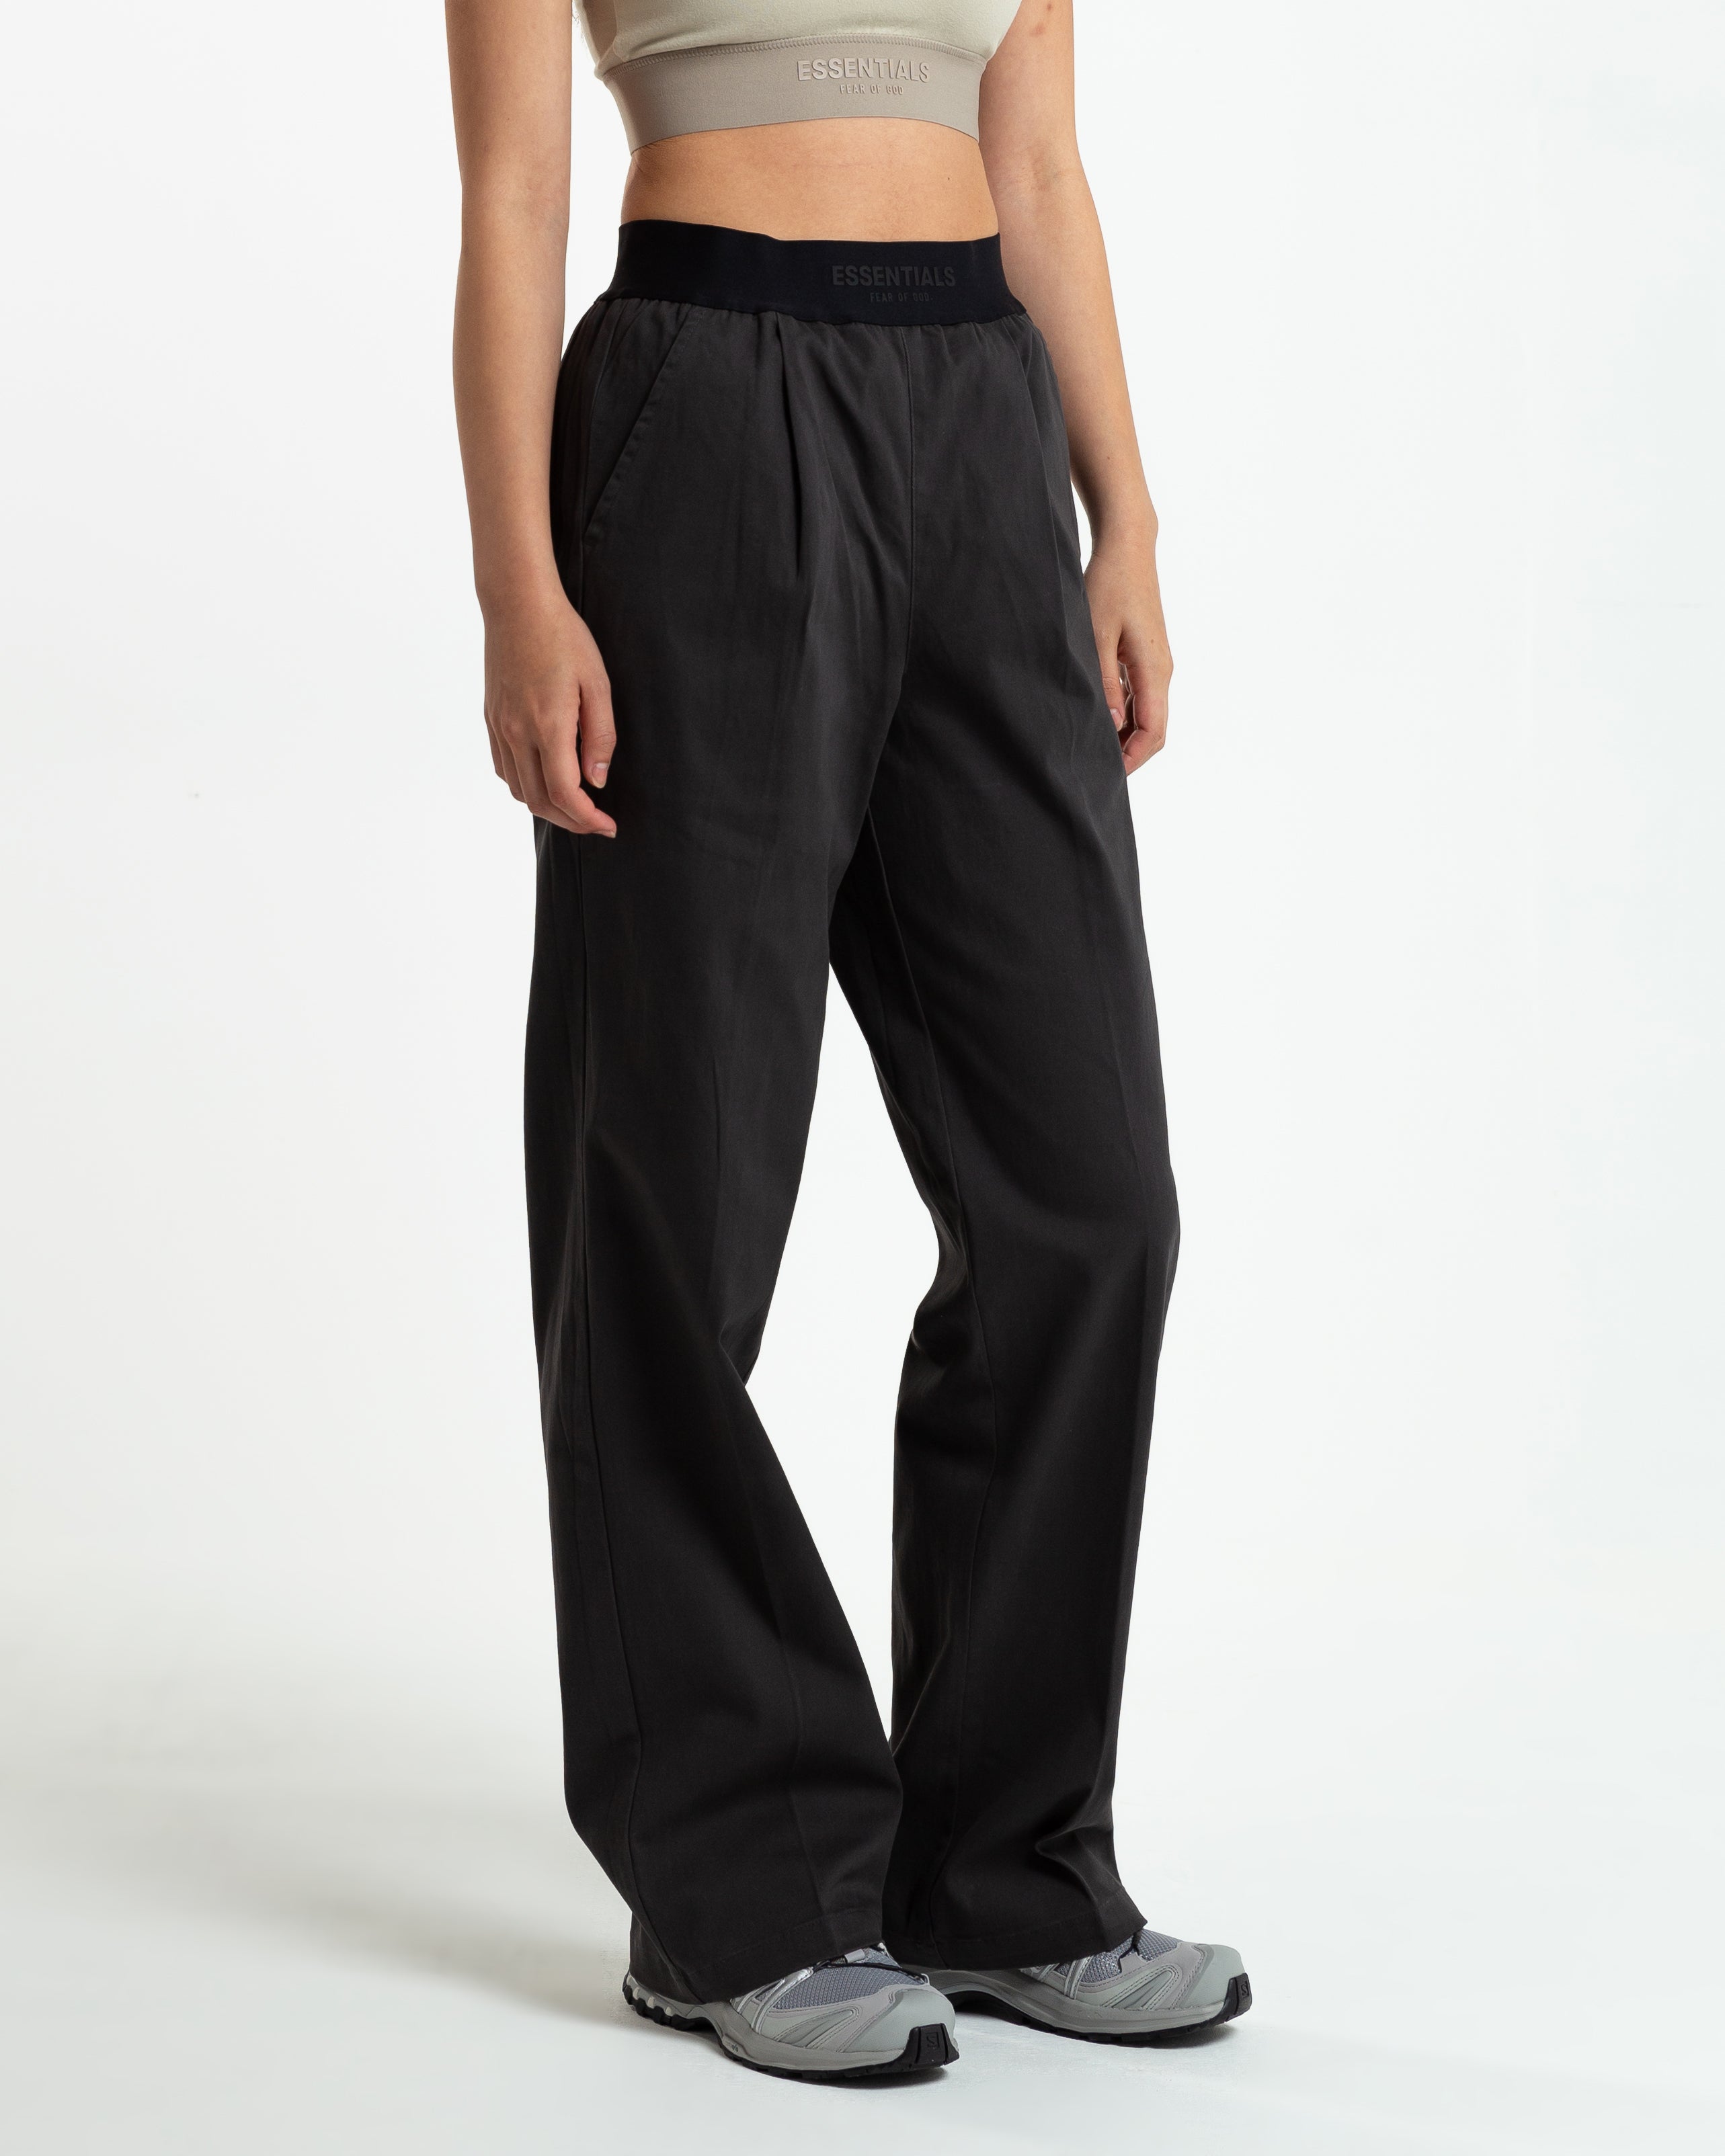 Women's Relaxed Trouser in Iron